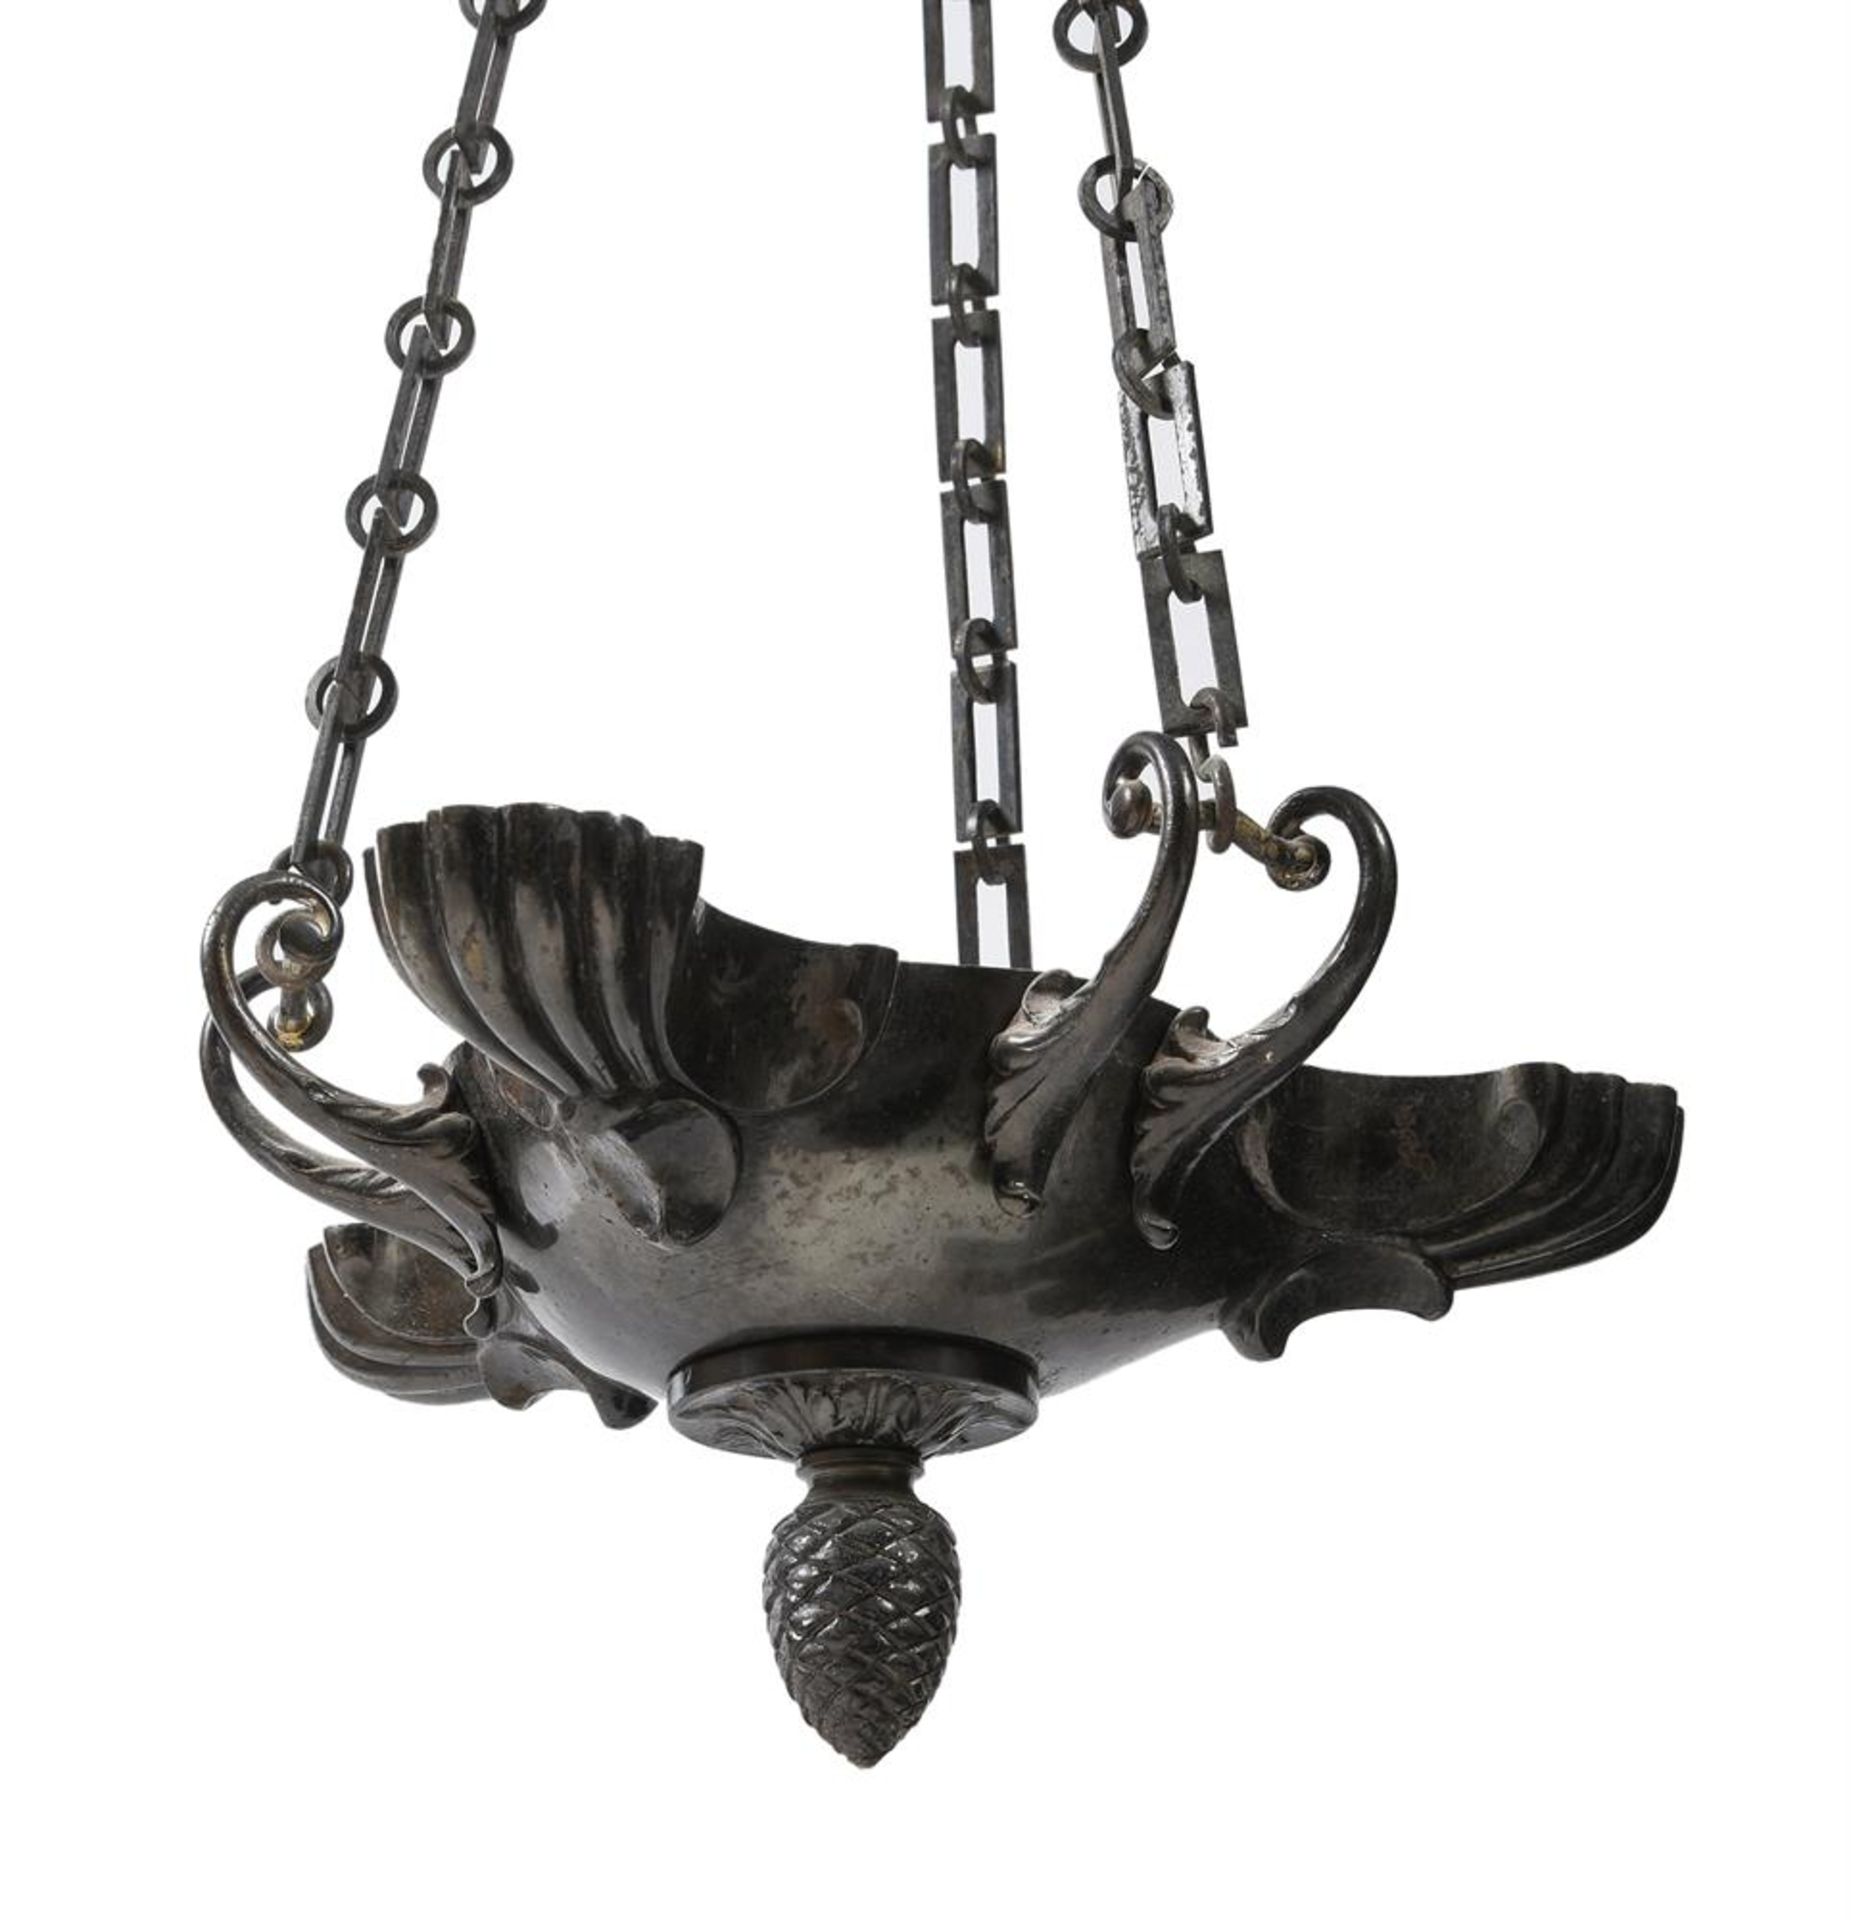 A PAIR OF WILLIAM IV COLZA HANGING LIGHTS, CIRCA 1830-1840 - Image 2 of 3